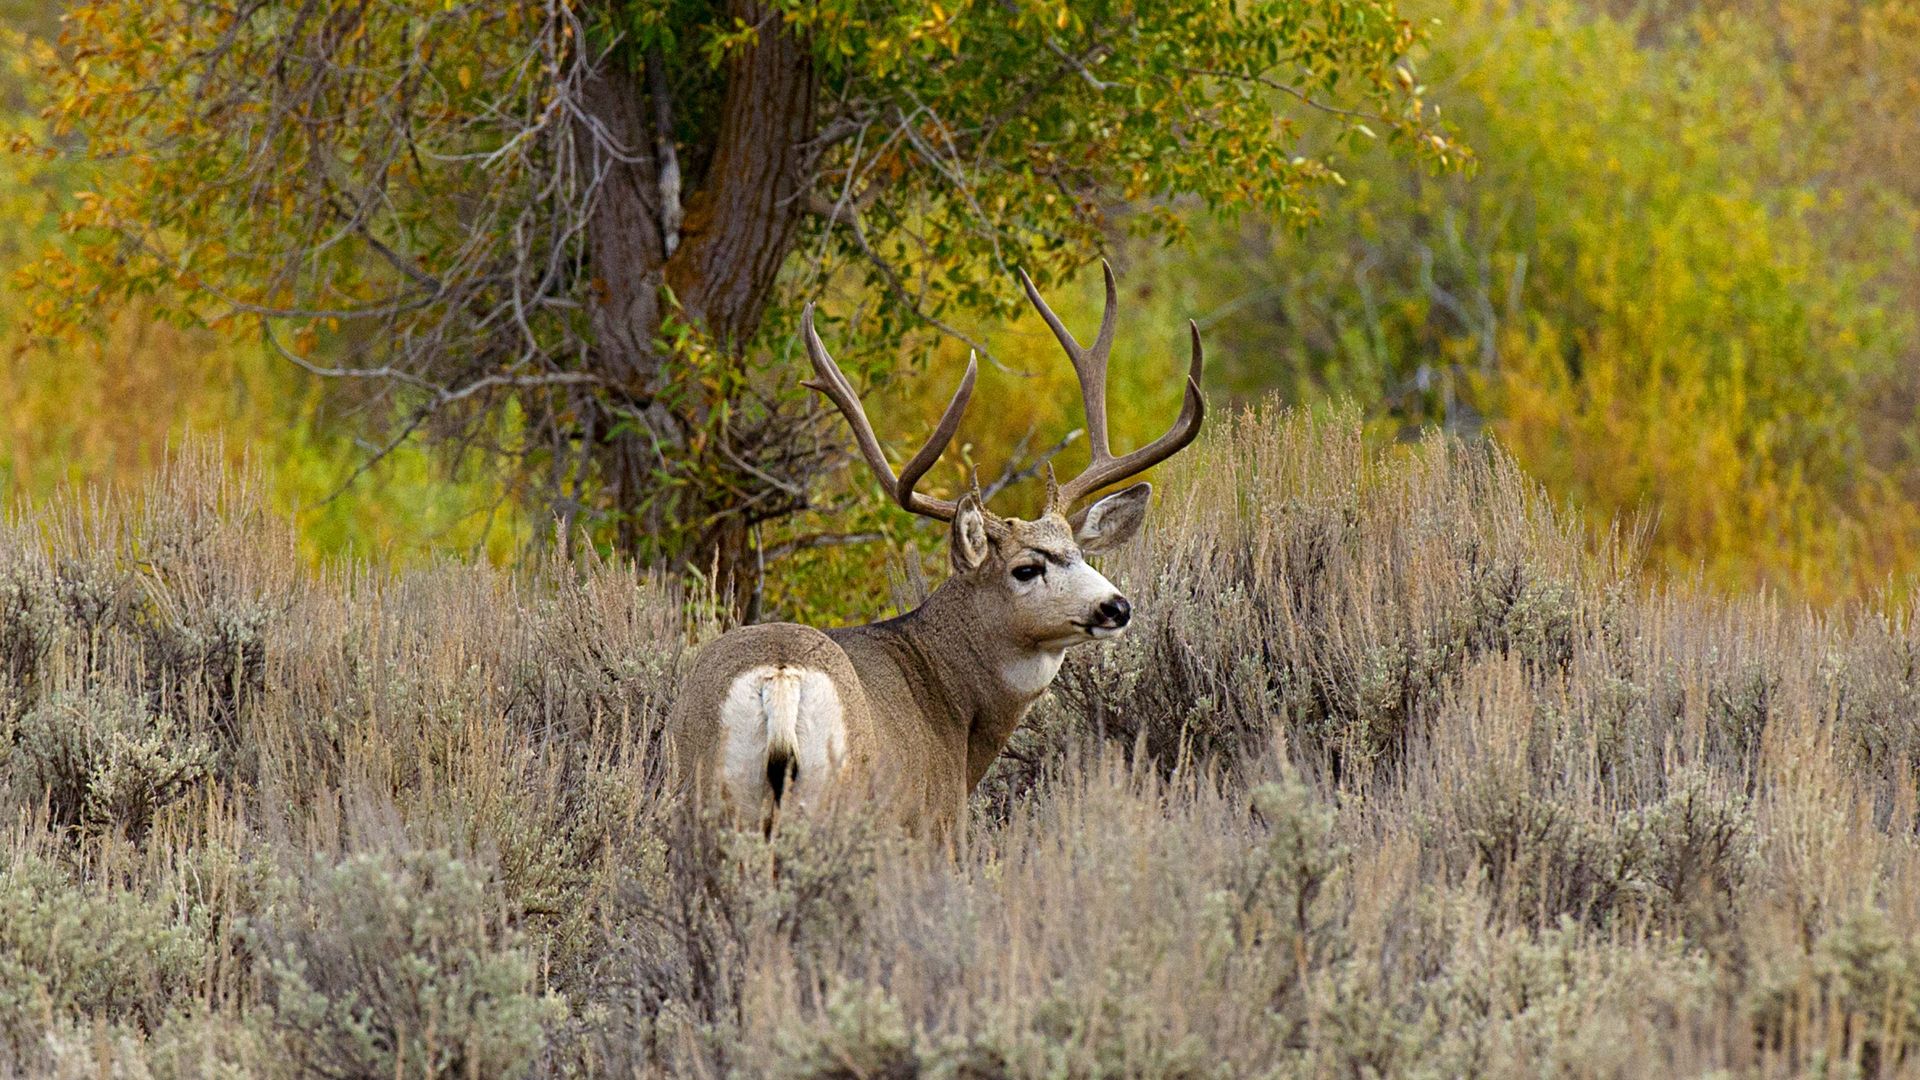 A mule deer in the brush October 4, 2012 in the Grand Teton National Park in northwestern Wyoming. 